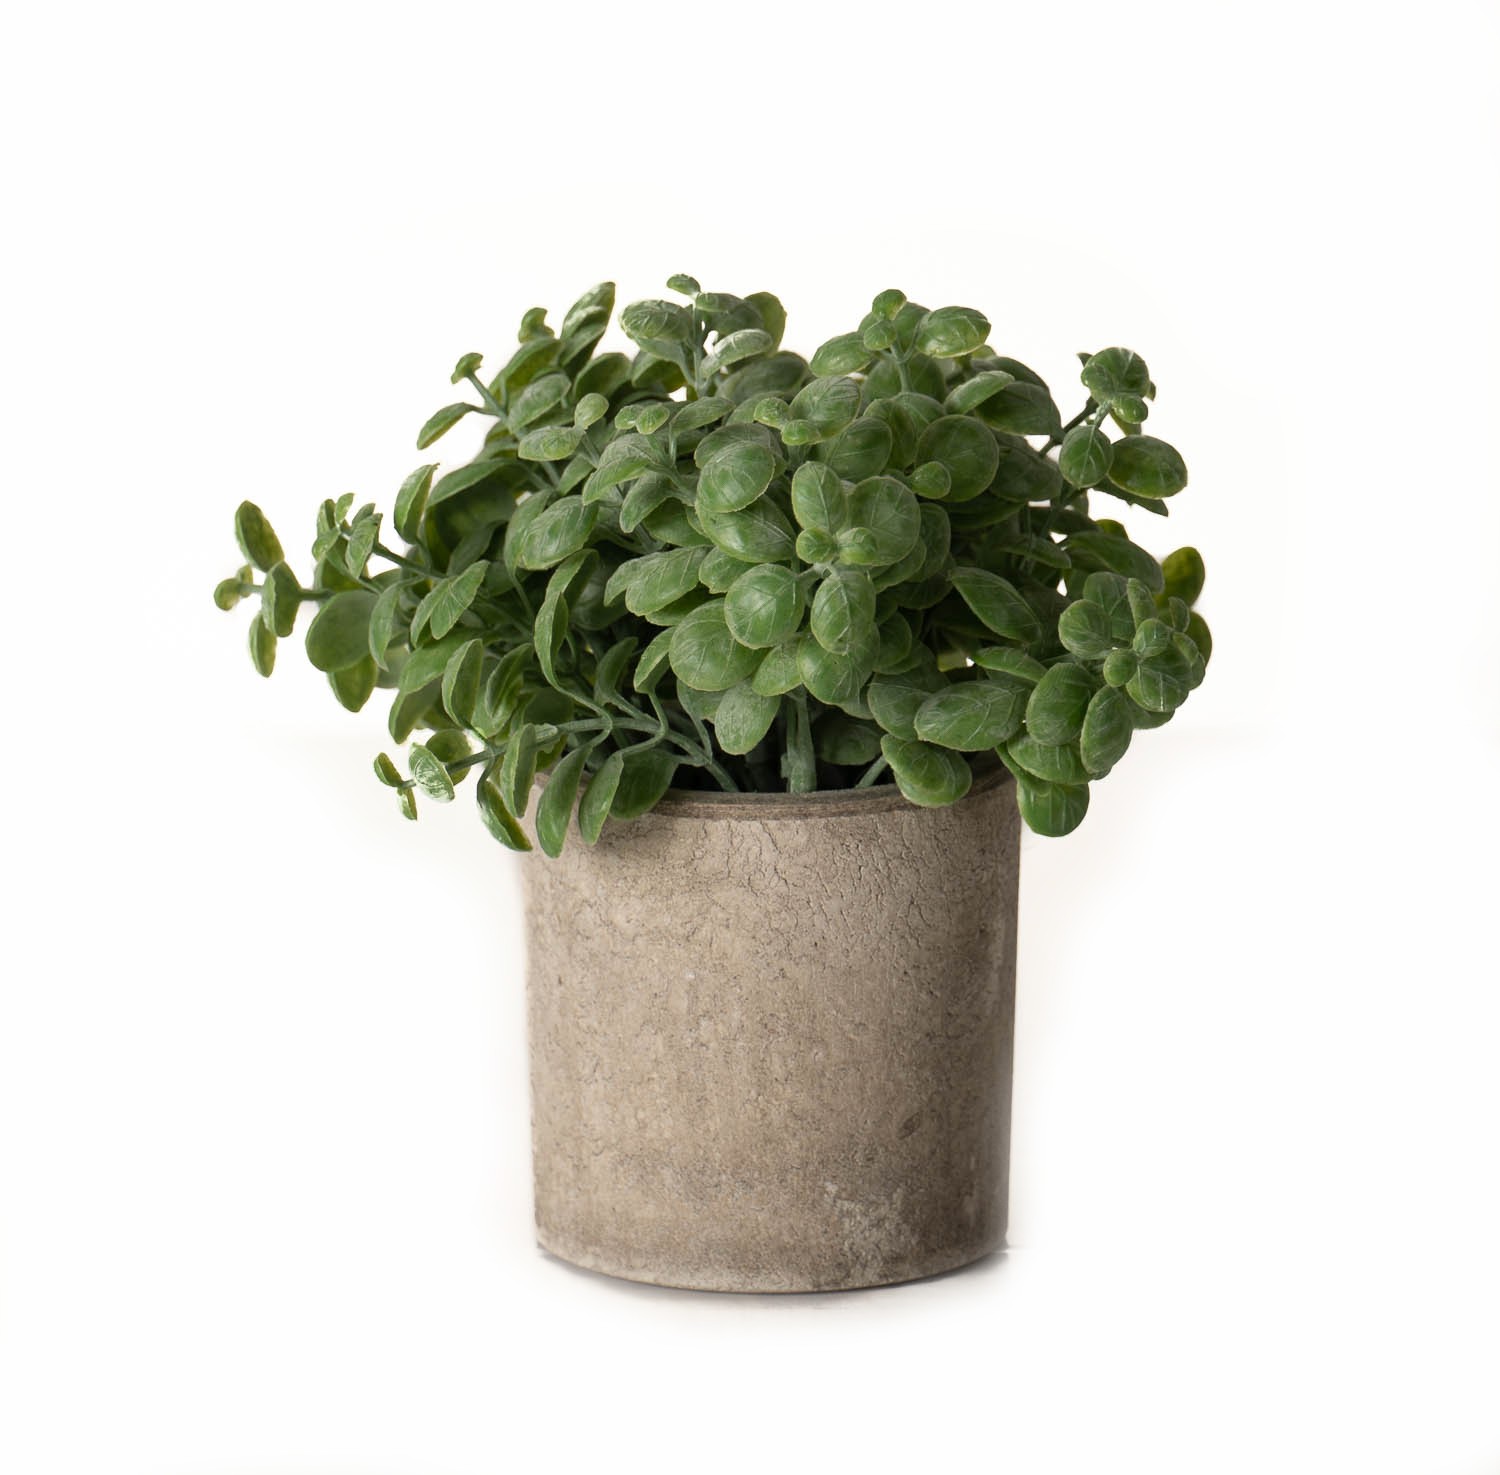 Basil Plant In Stone Effect Pot - Image 1